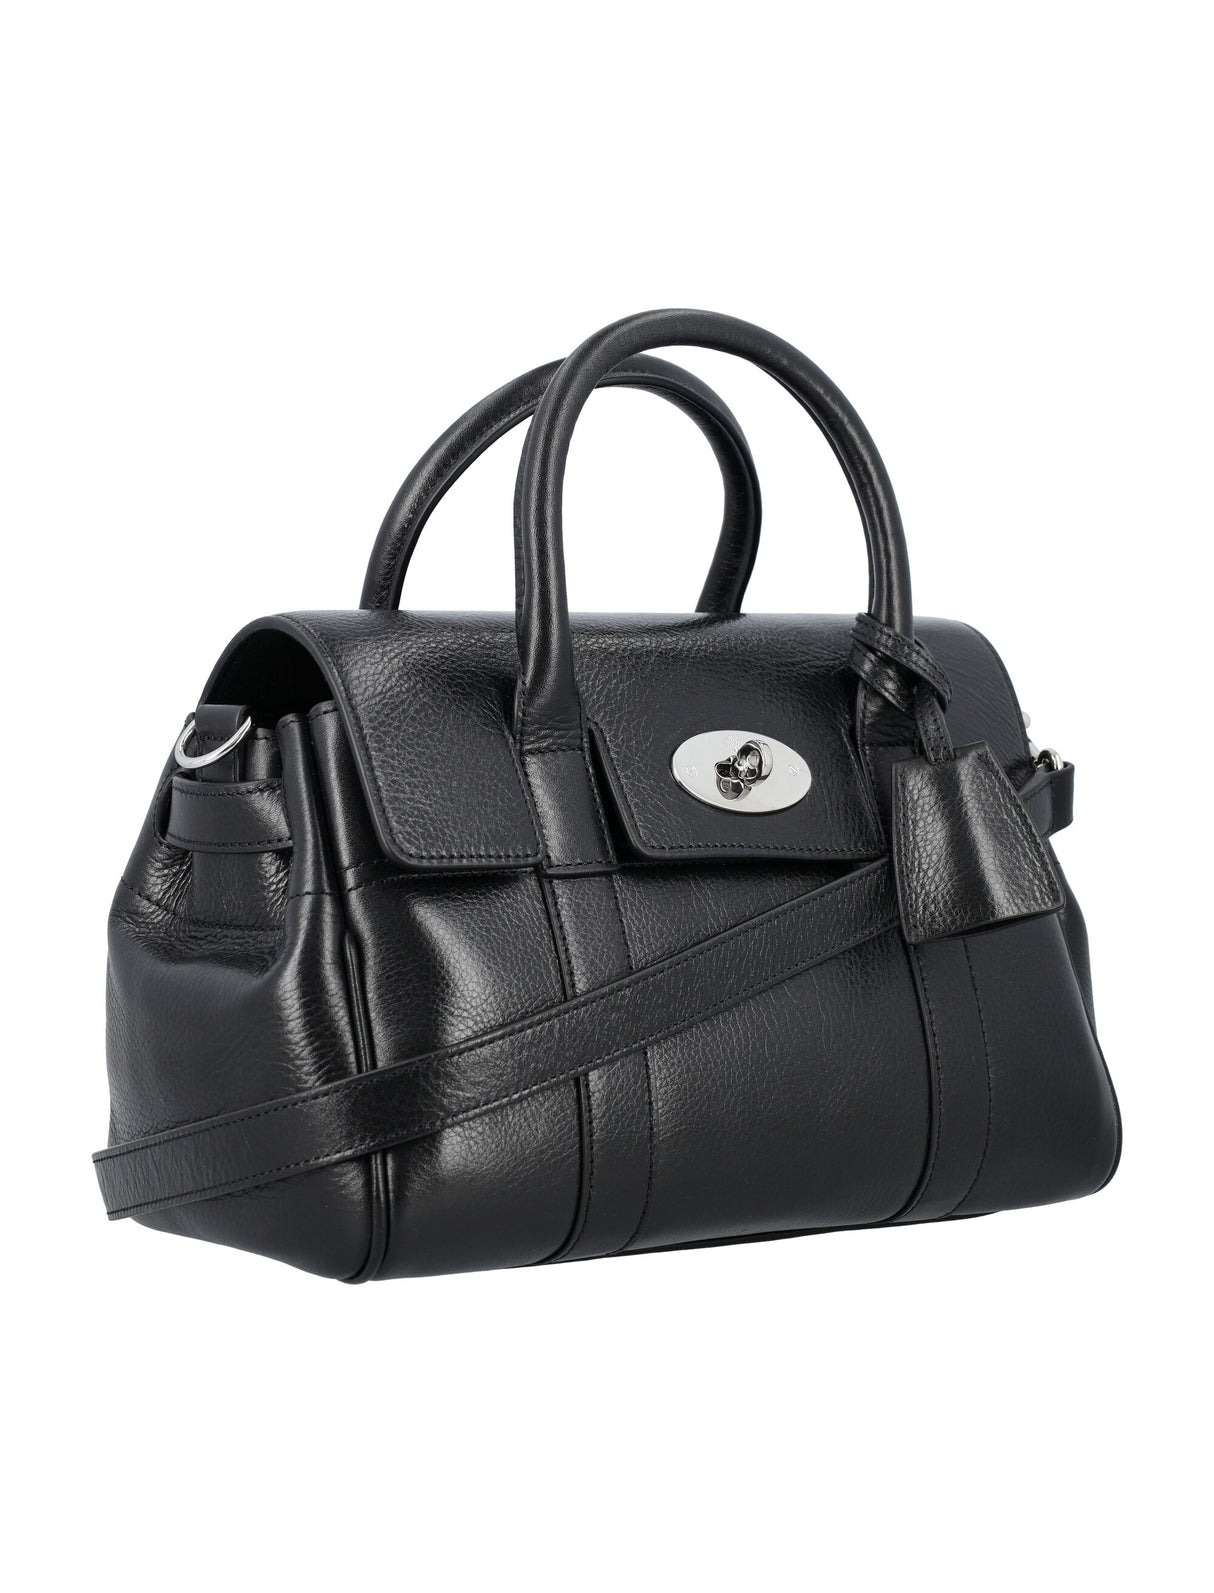 MULBERRY Chic Black Leather Mini Bayswater Satchel with Silver-Tone Accents (27x16x14 cm)